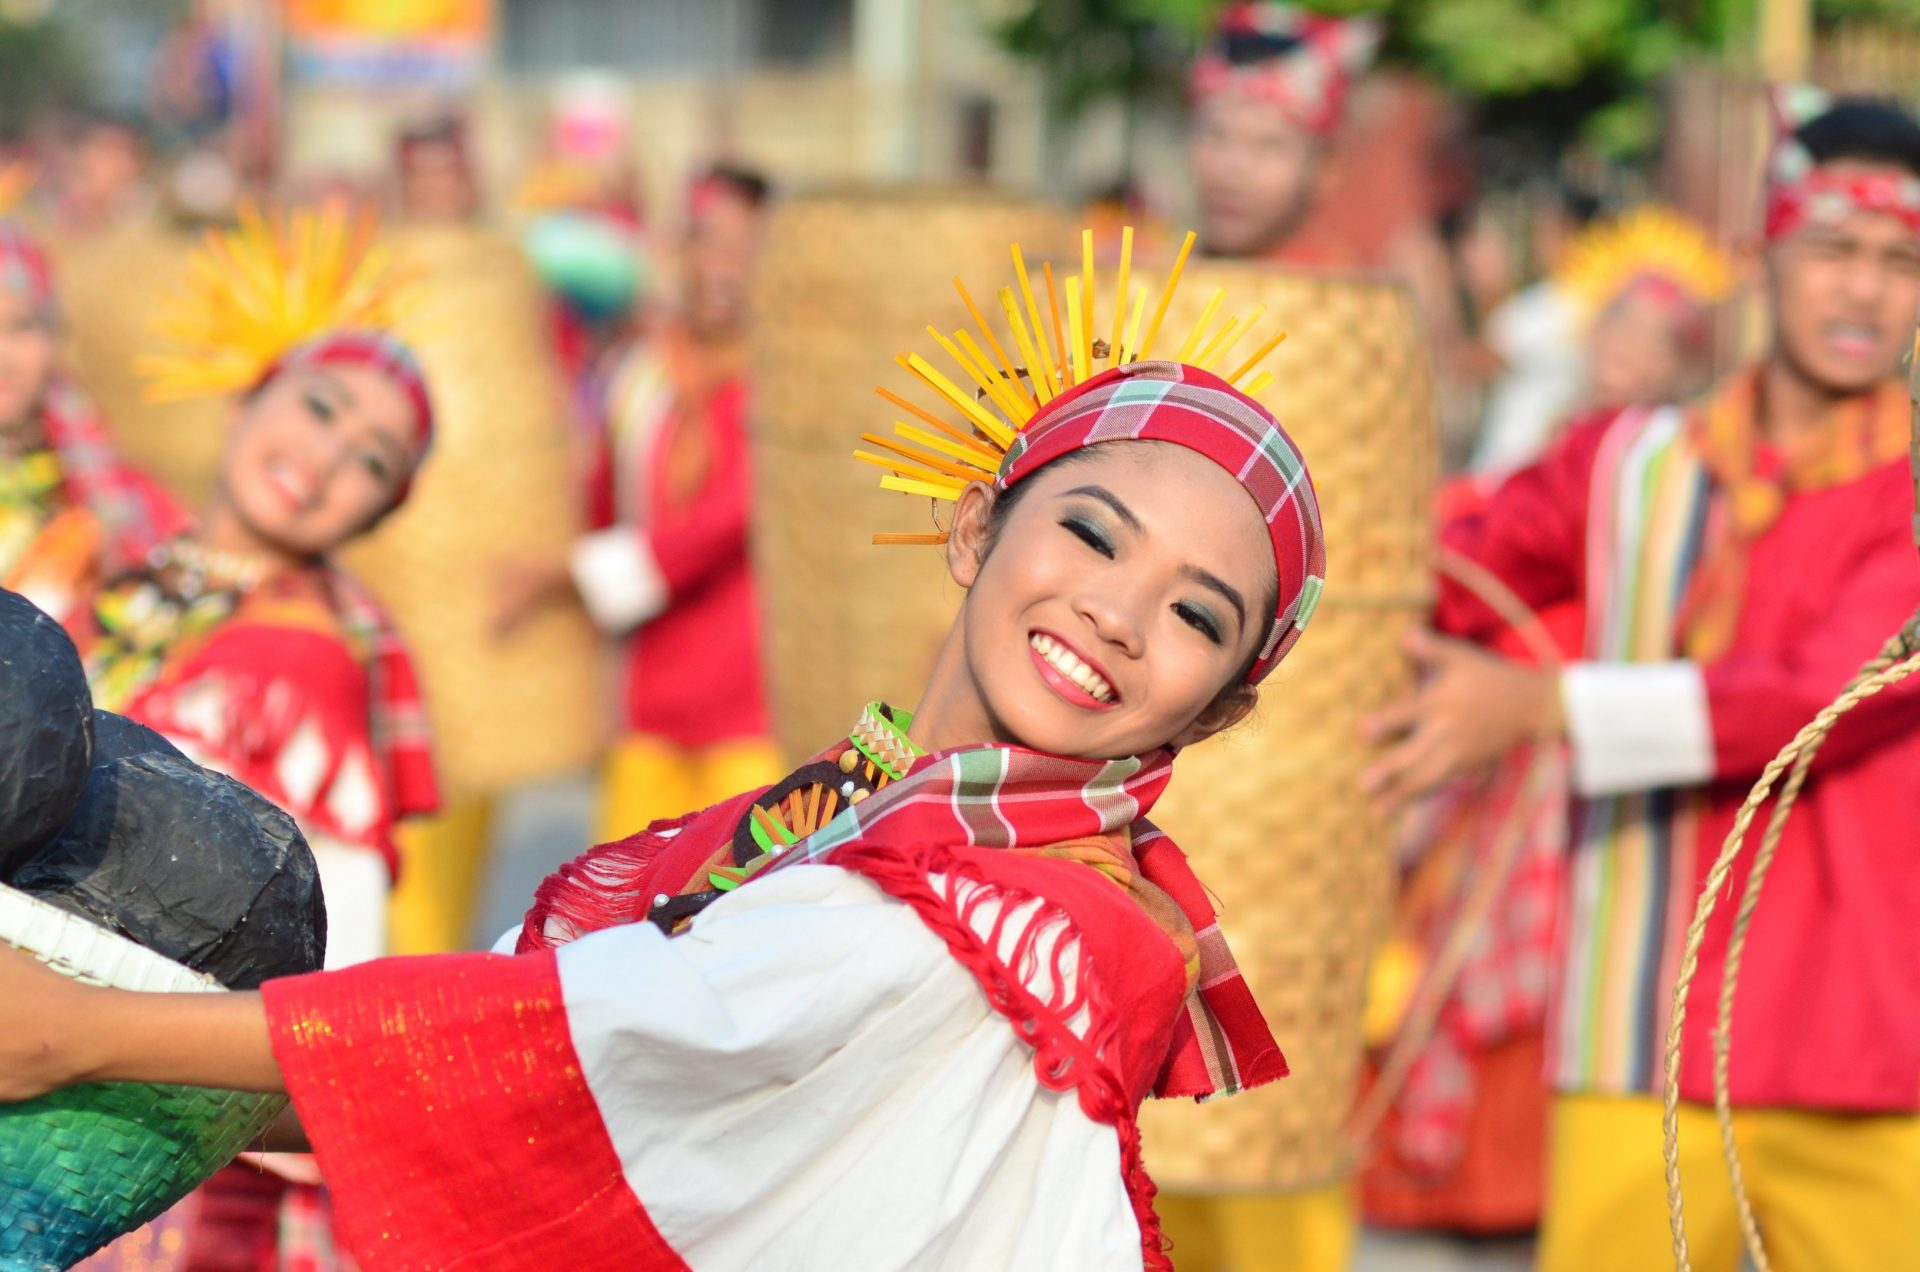 There are many traditional celebrations in the Philippines all year round